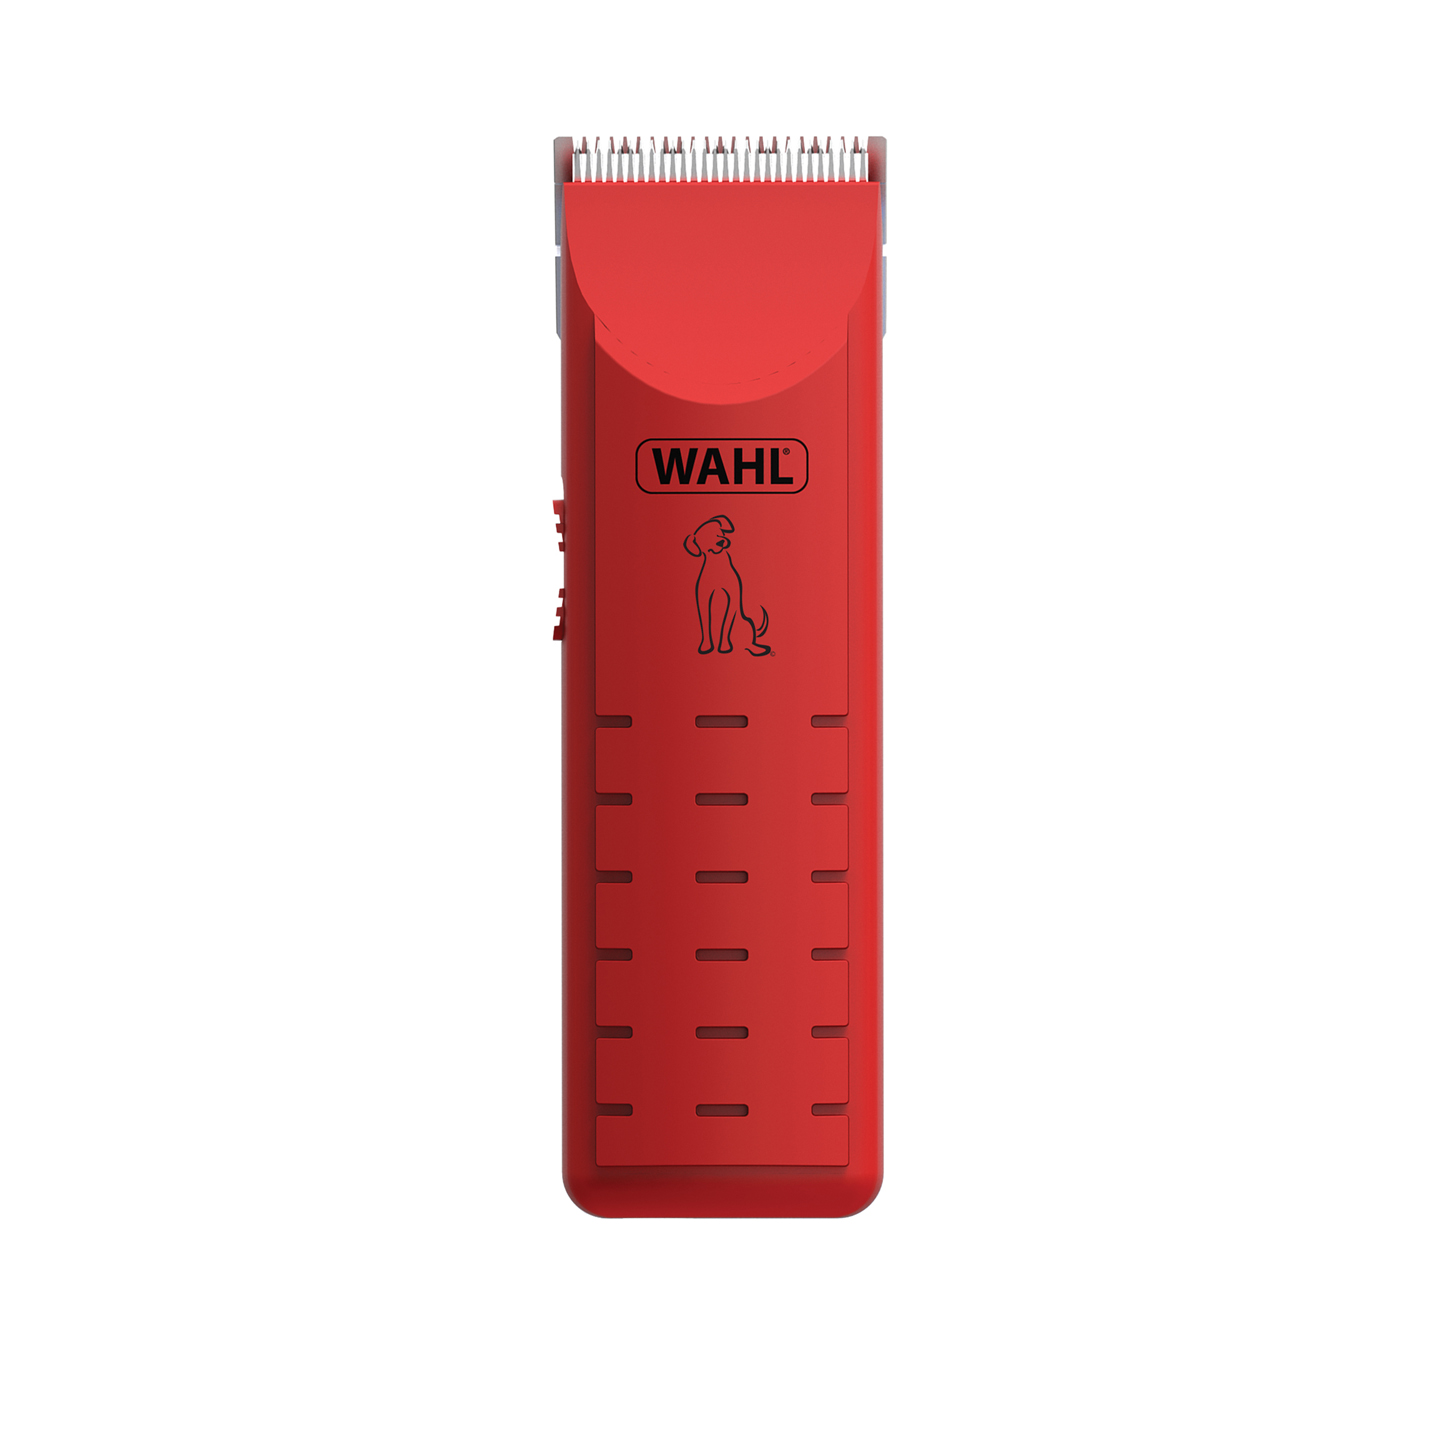 wahl cordless pet clippers